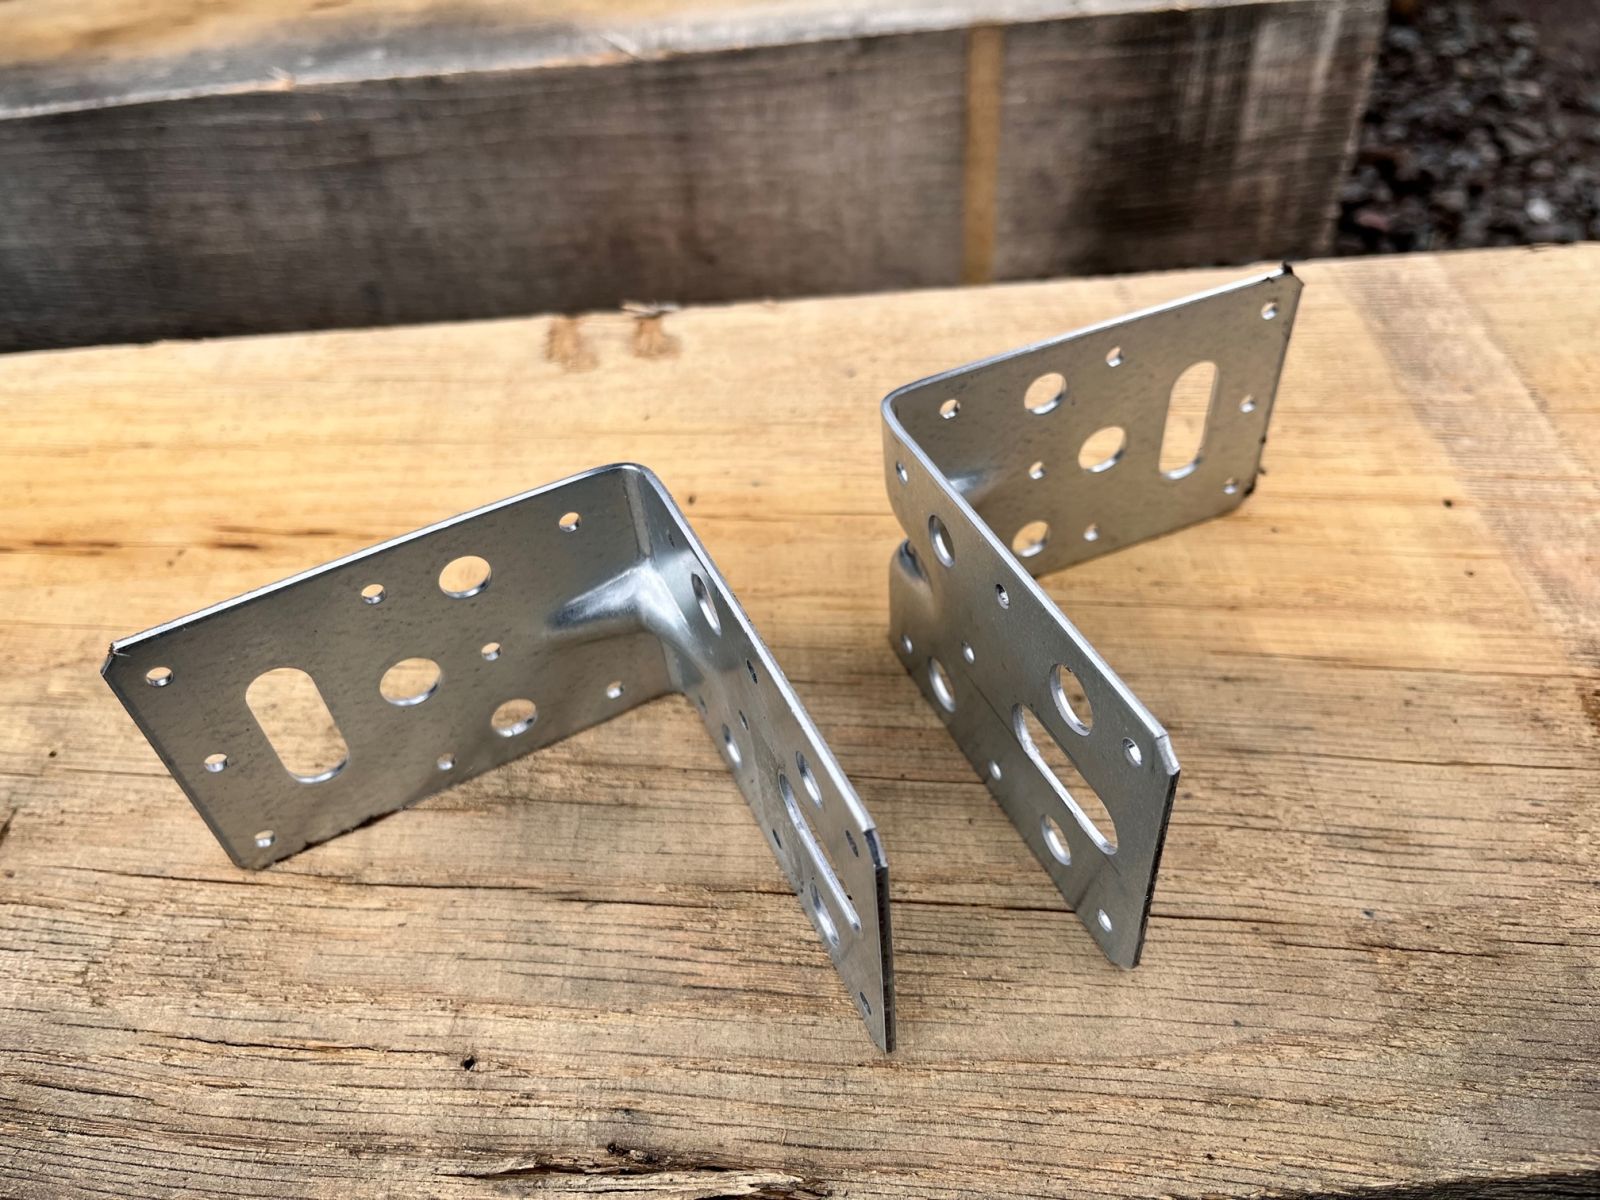 Steel angle brackets are useful for fastening railway sleepers together at the 90 degree corners. Railwaysleepers.com